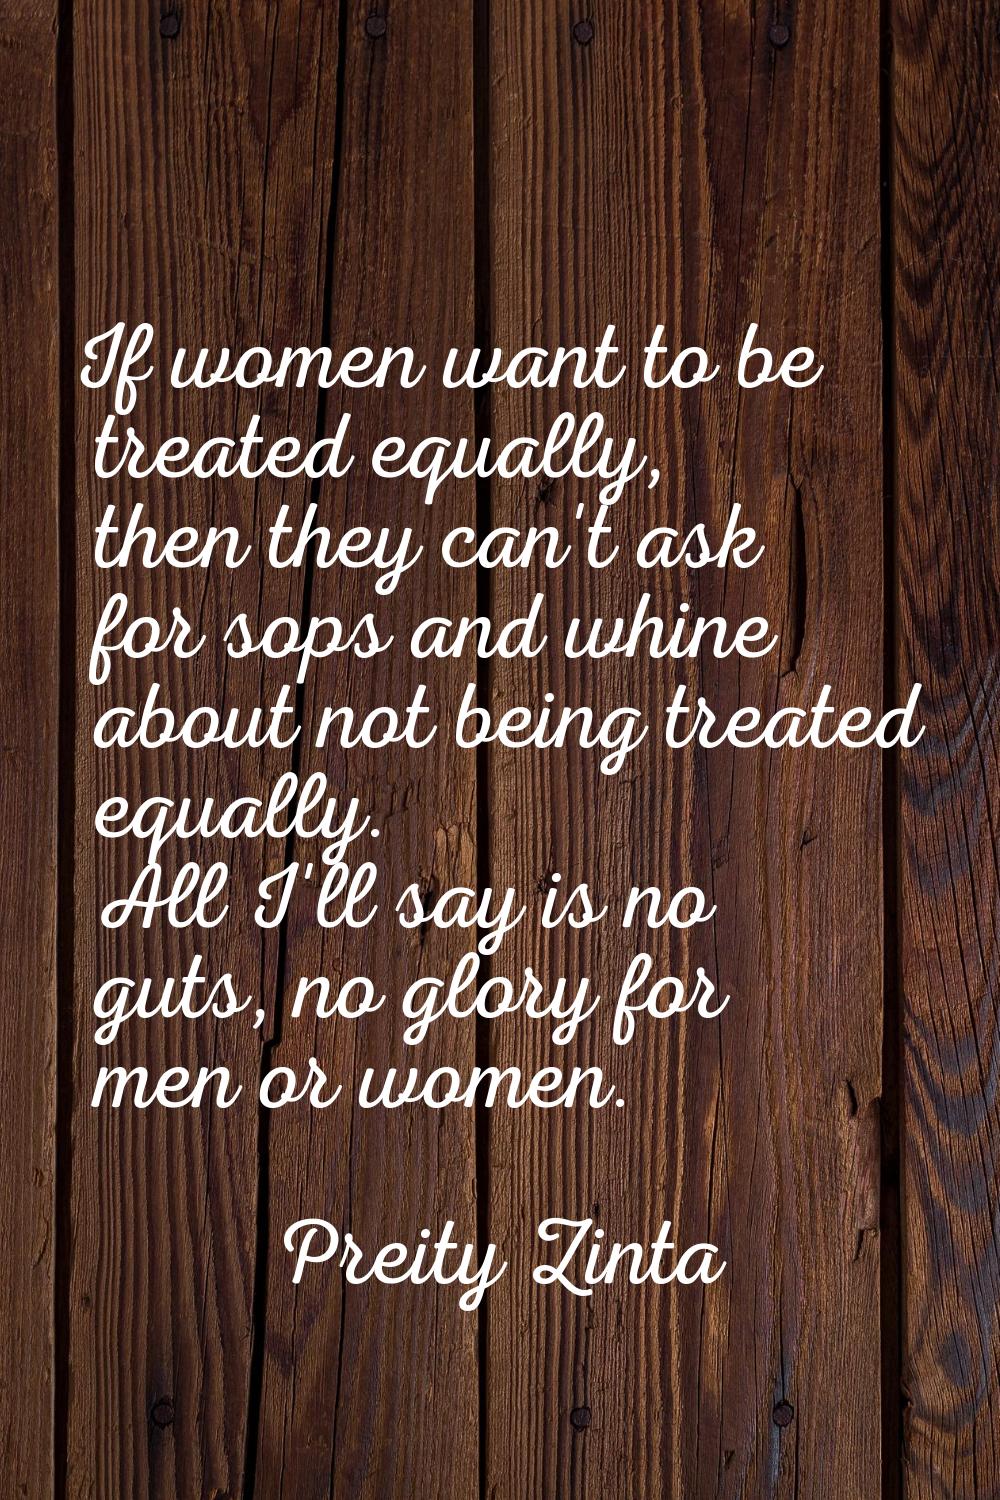 If women want to be treated equally, then they can't ask for sops and whine about not being treated